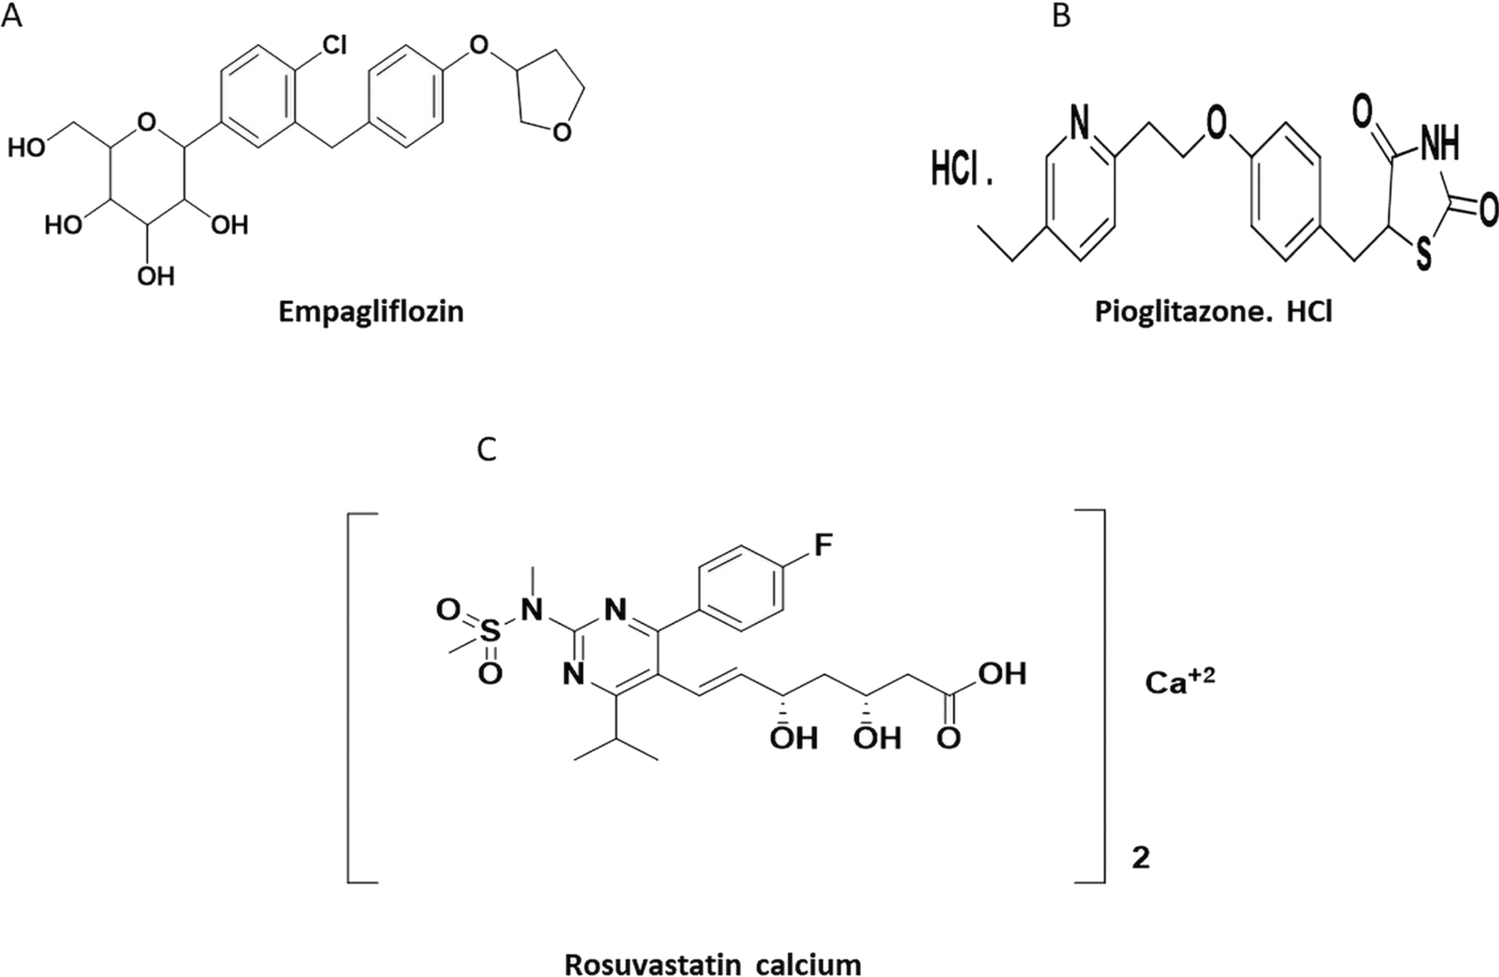 Development of a highly sensitive and eco-friendly high-performance thin-layer chromatography approach for the determination of empagliflozin, pioglitazone, and rosuvastatin simultaneously in pharmaceutical preparations and different biological fluids